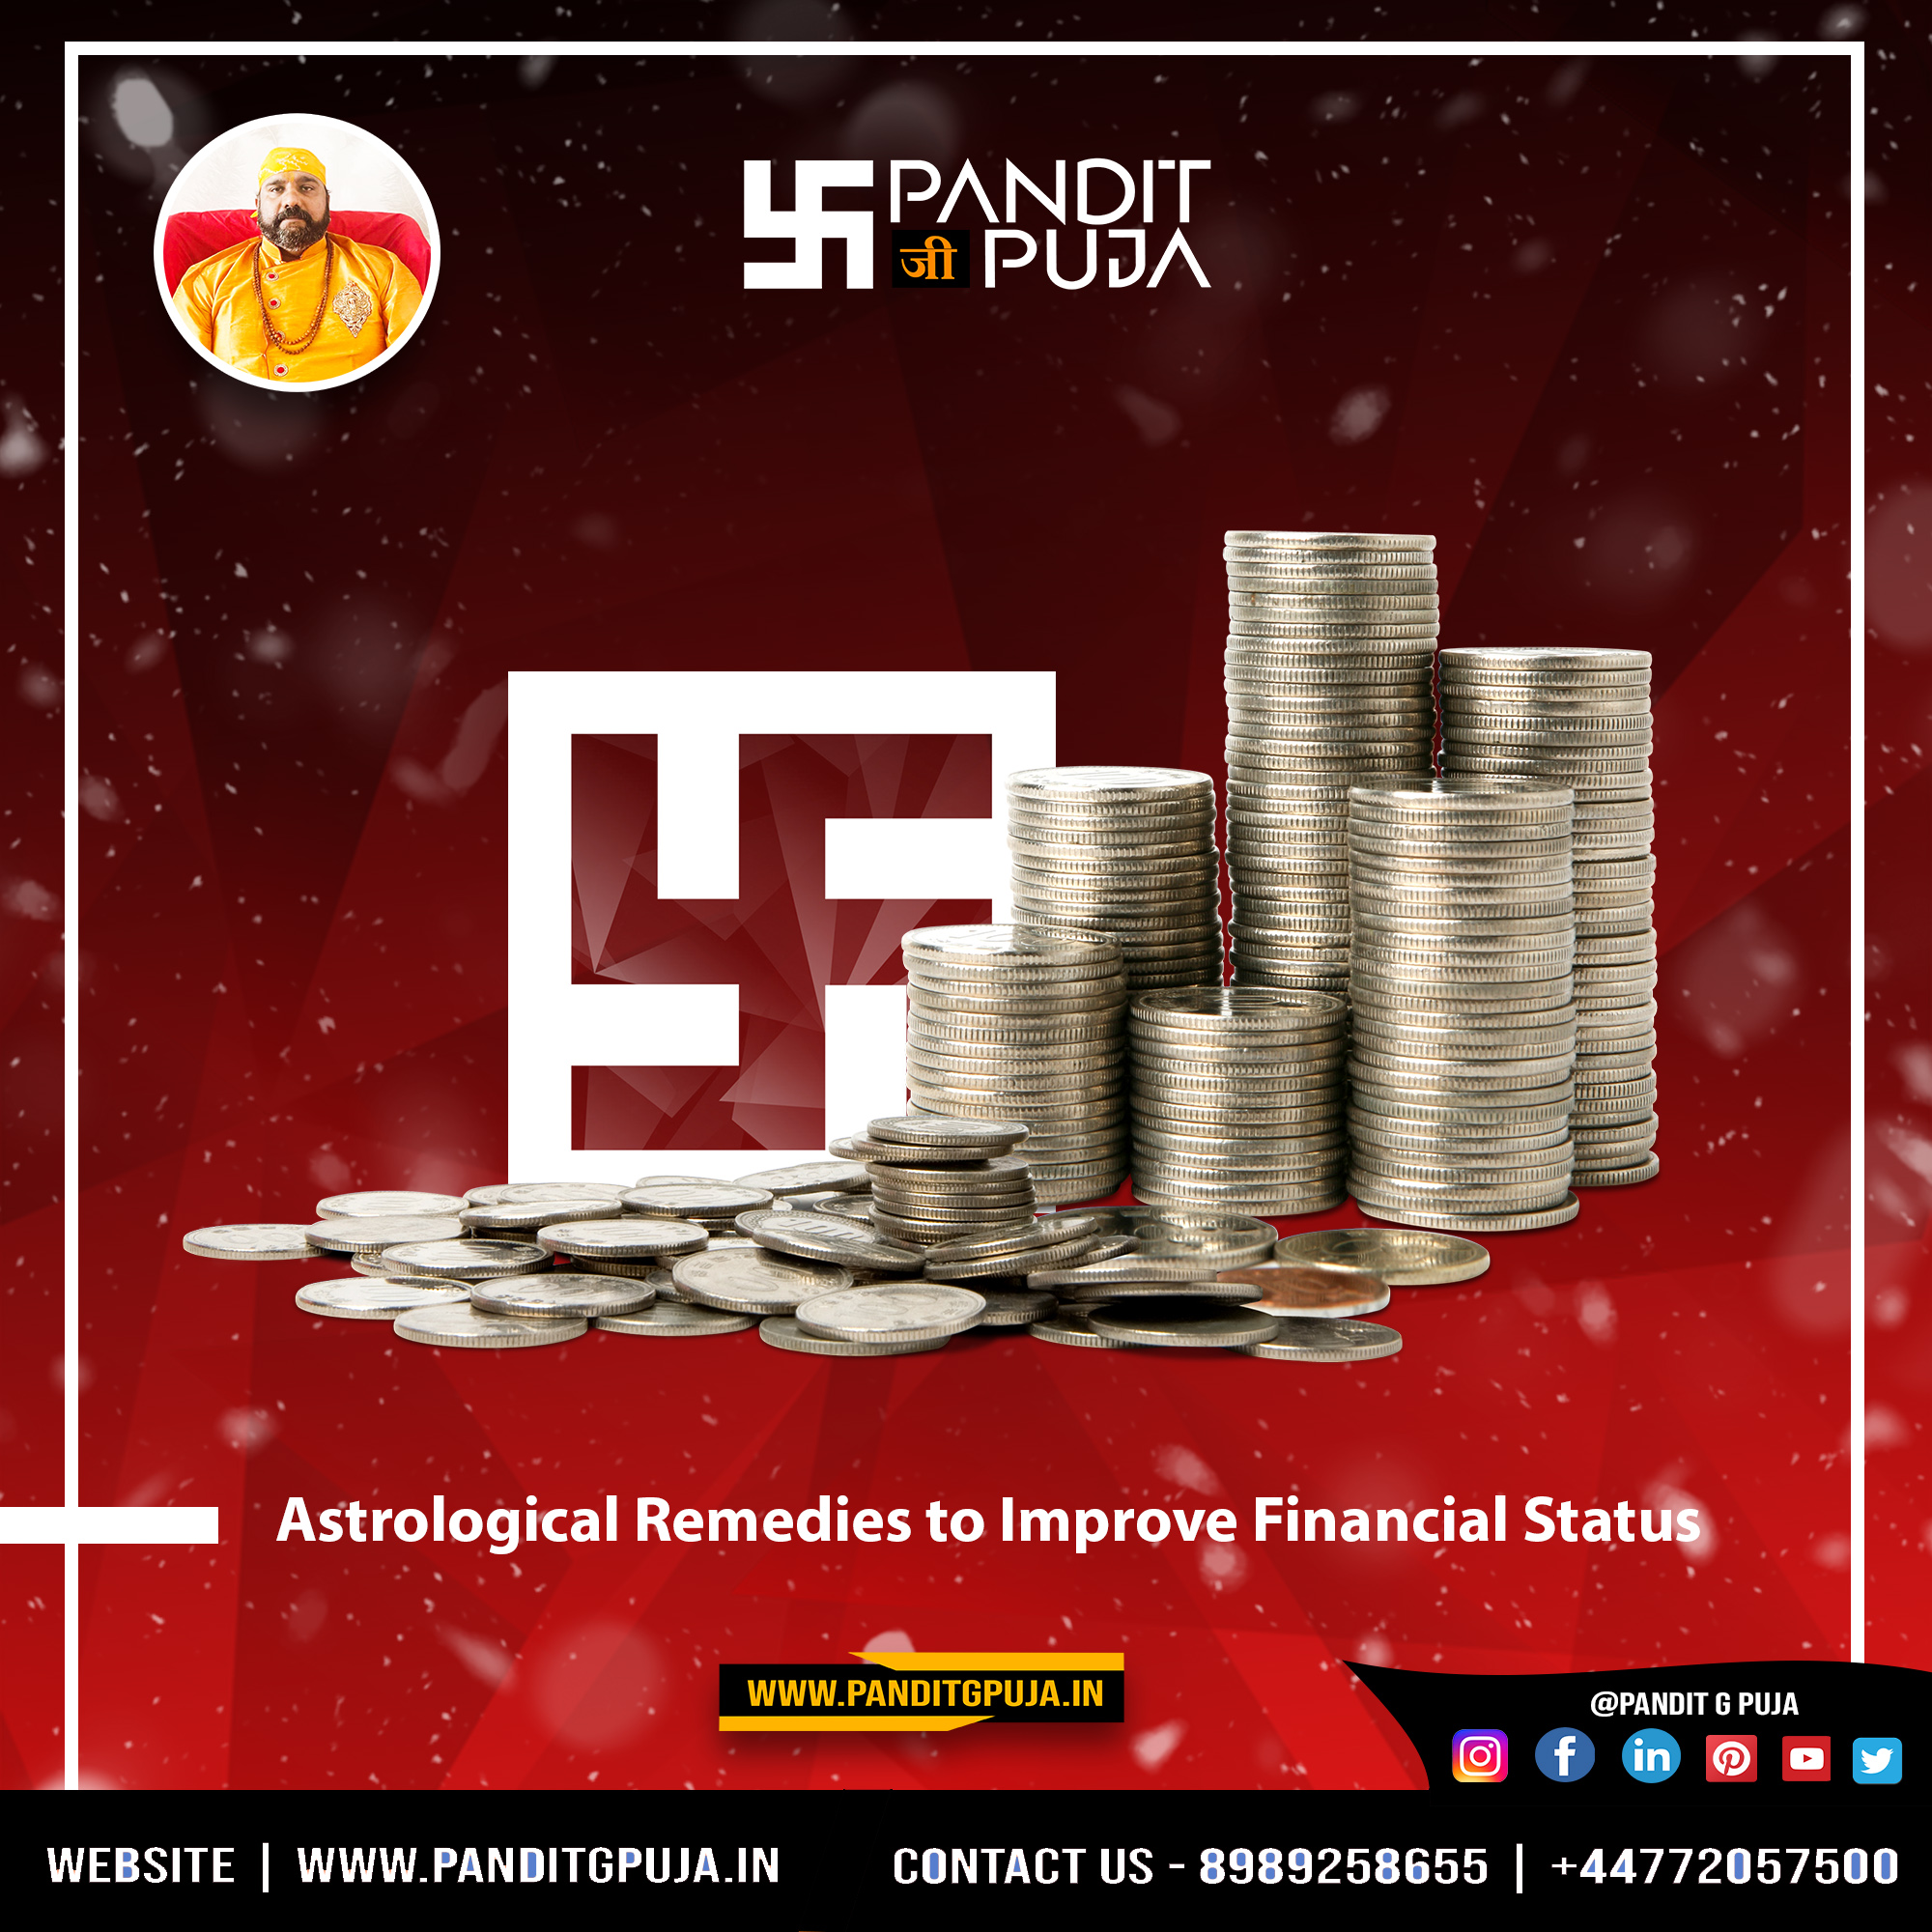 Astrological Remedies to Improve Financial Status